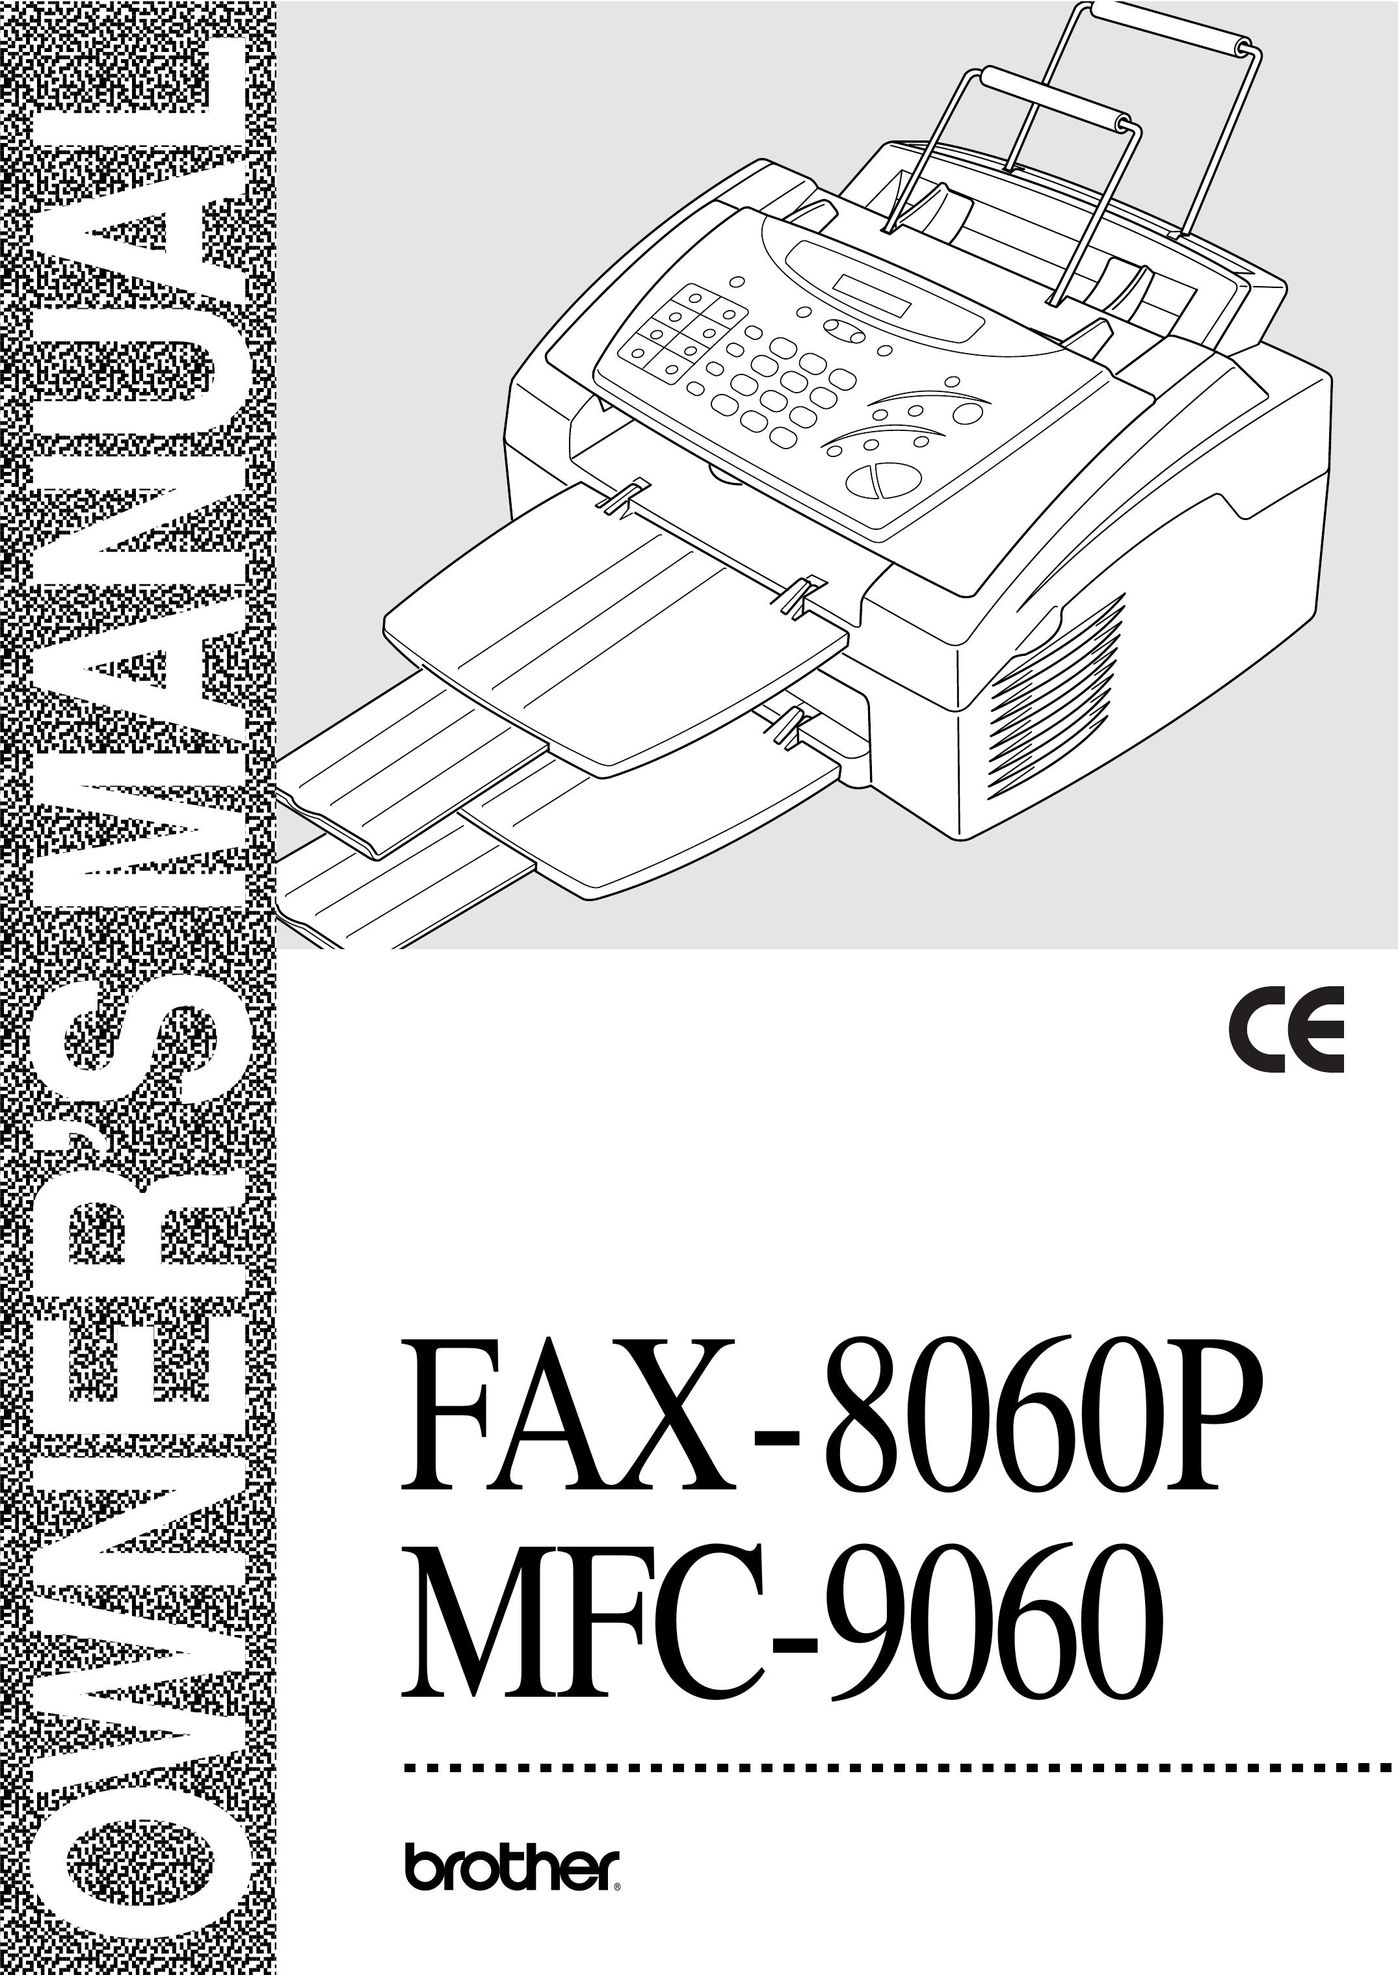 Brother 8060P MFC-9060 All in One Printer User Manual